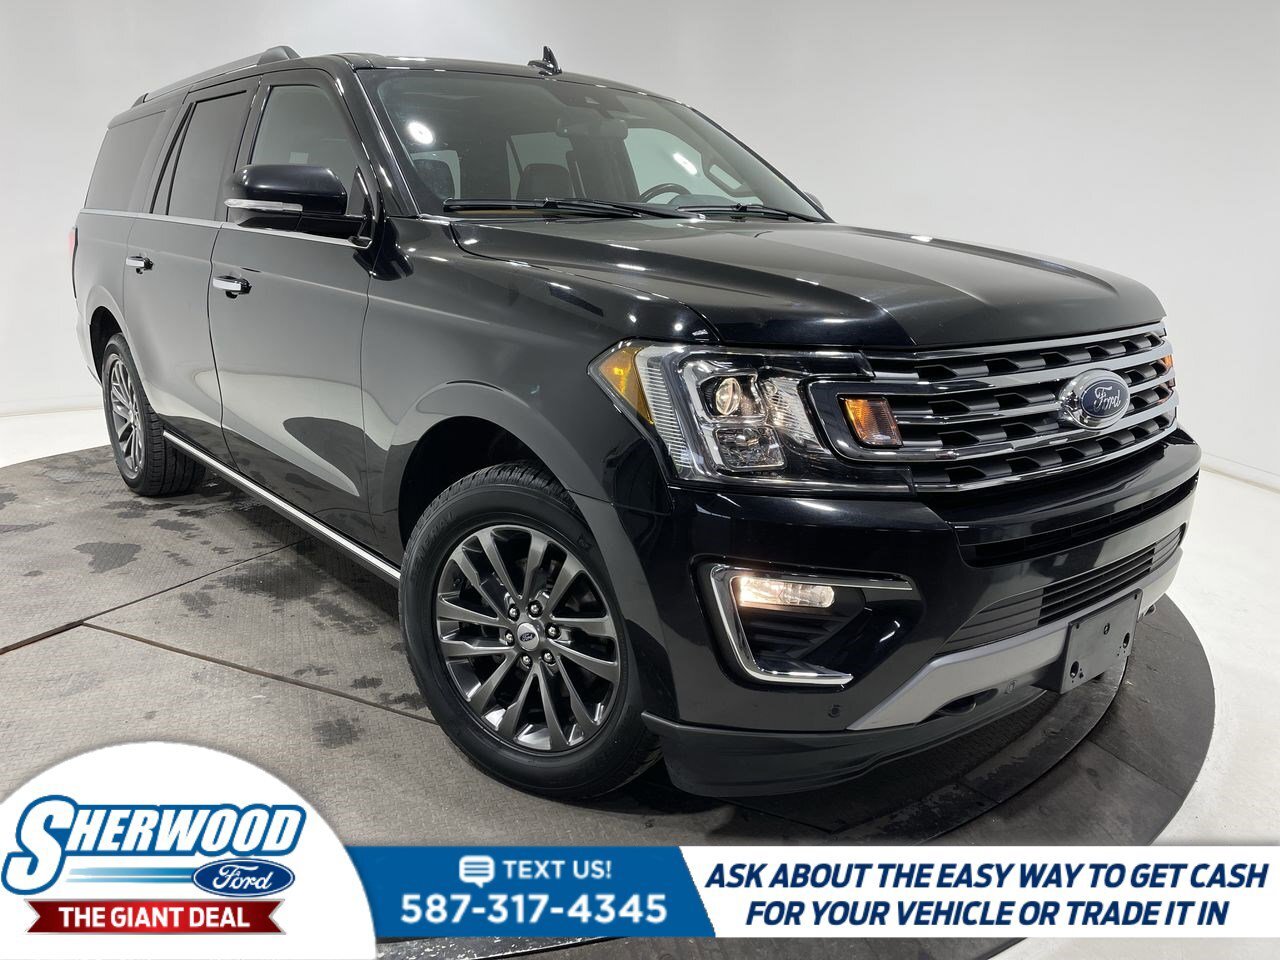 2021 Ford Expedition LTD Max- $0 Down $252 Weekly